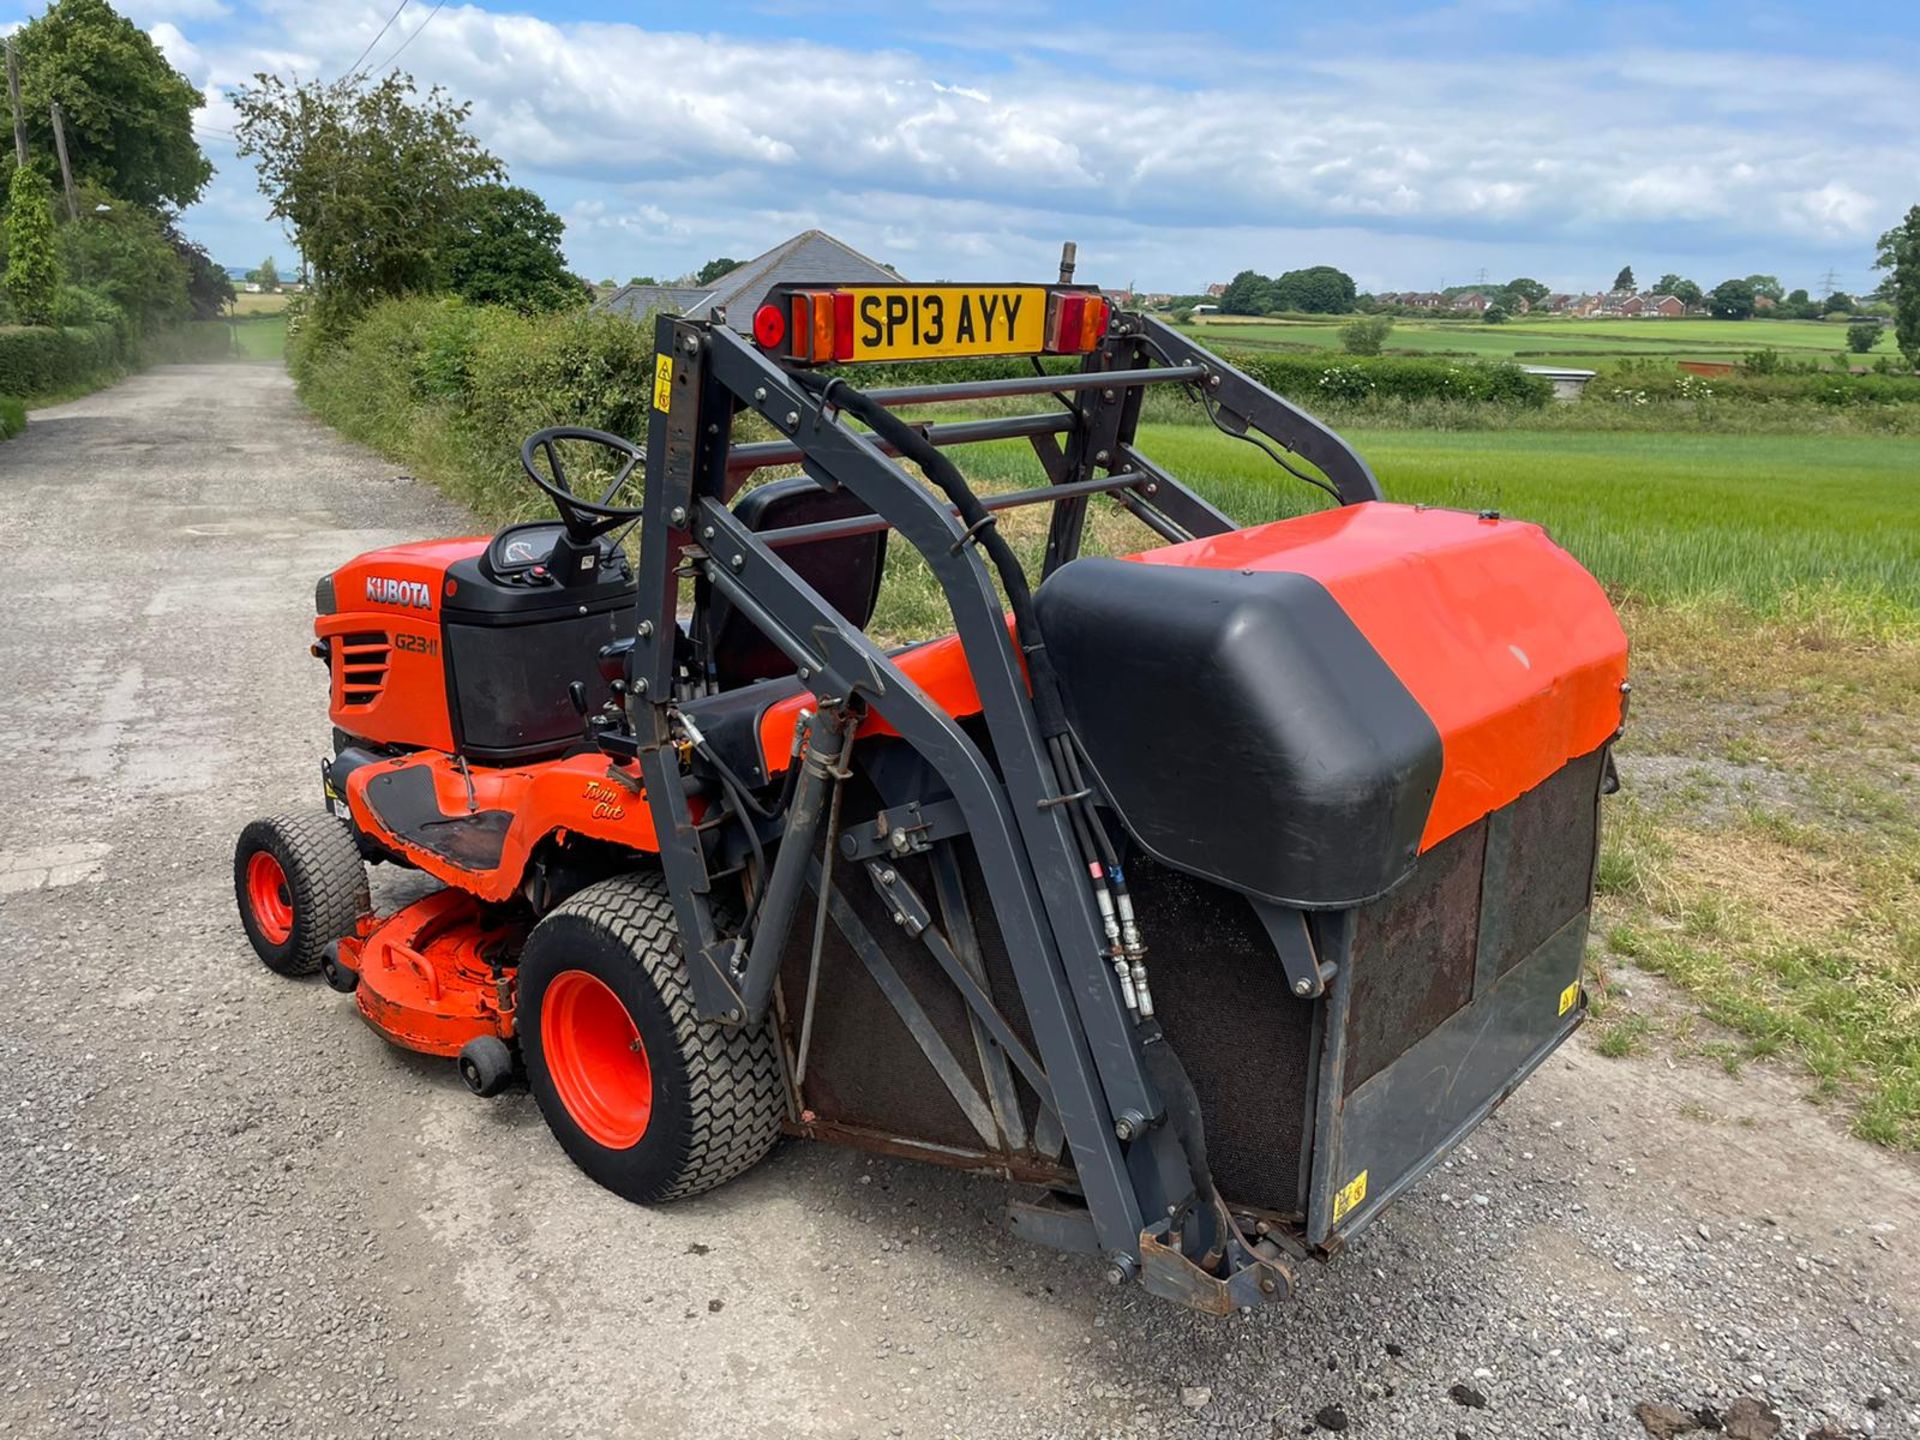 2013 KUBOTA G23-II RIDE ON HIGH TIP MOWER, RUNS AND DRIVES, SHOWING A LOW 771 HOURS *PLUS VAT* - Image 5 of 11